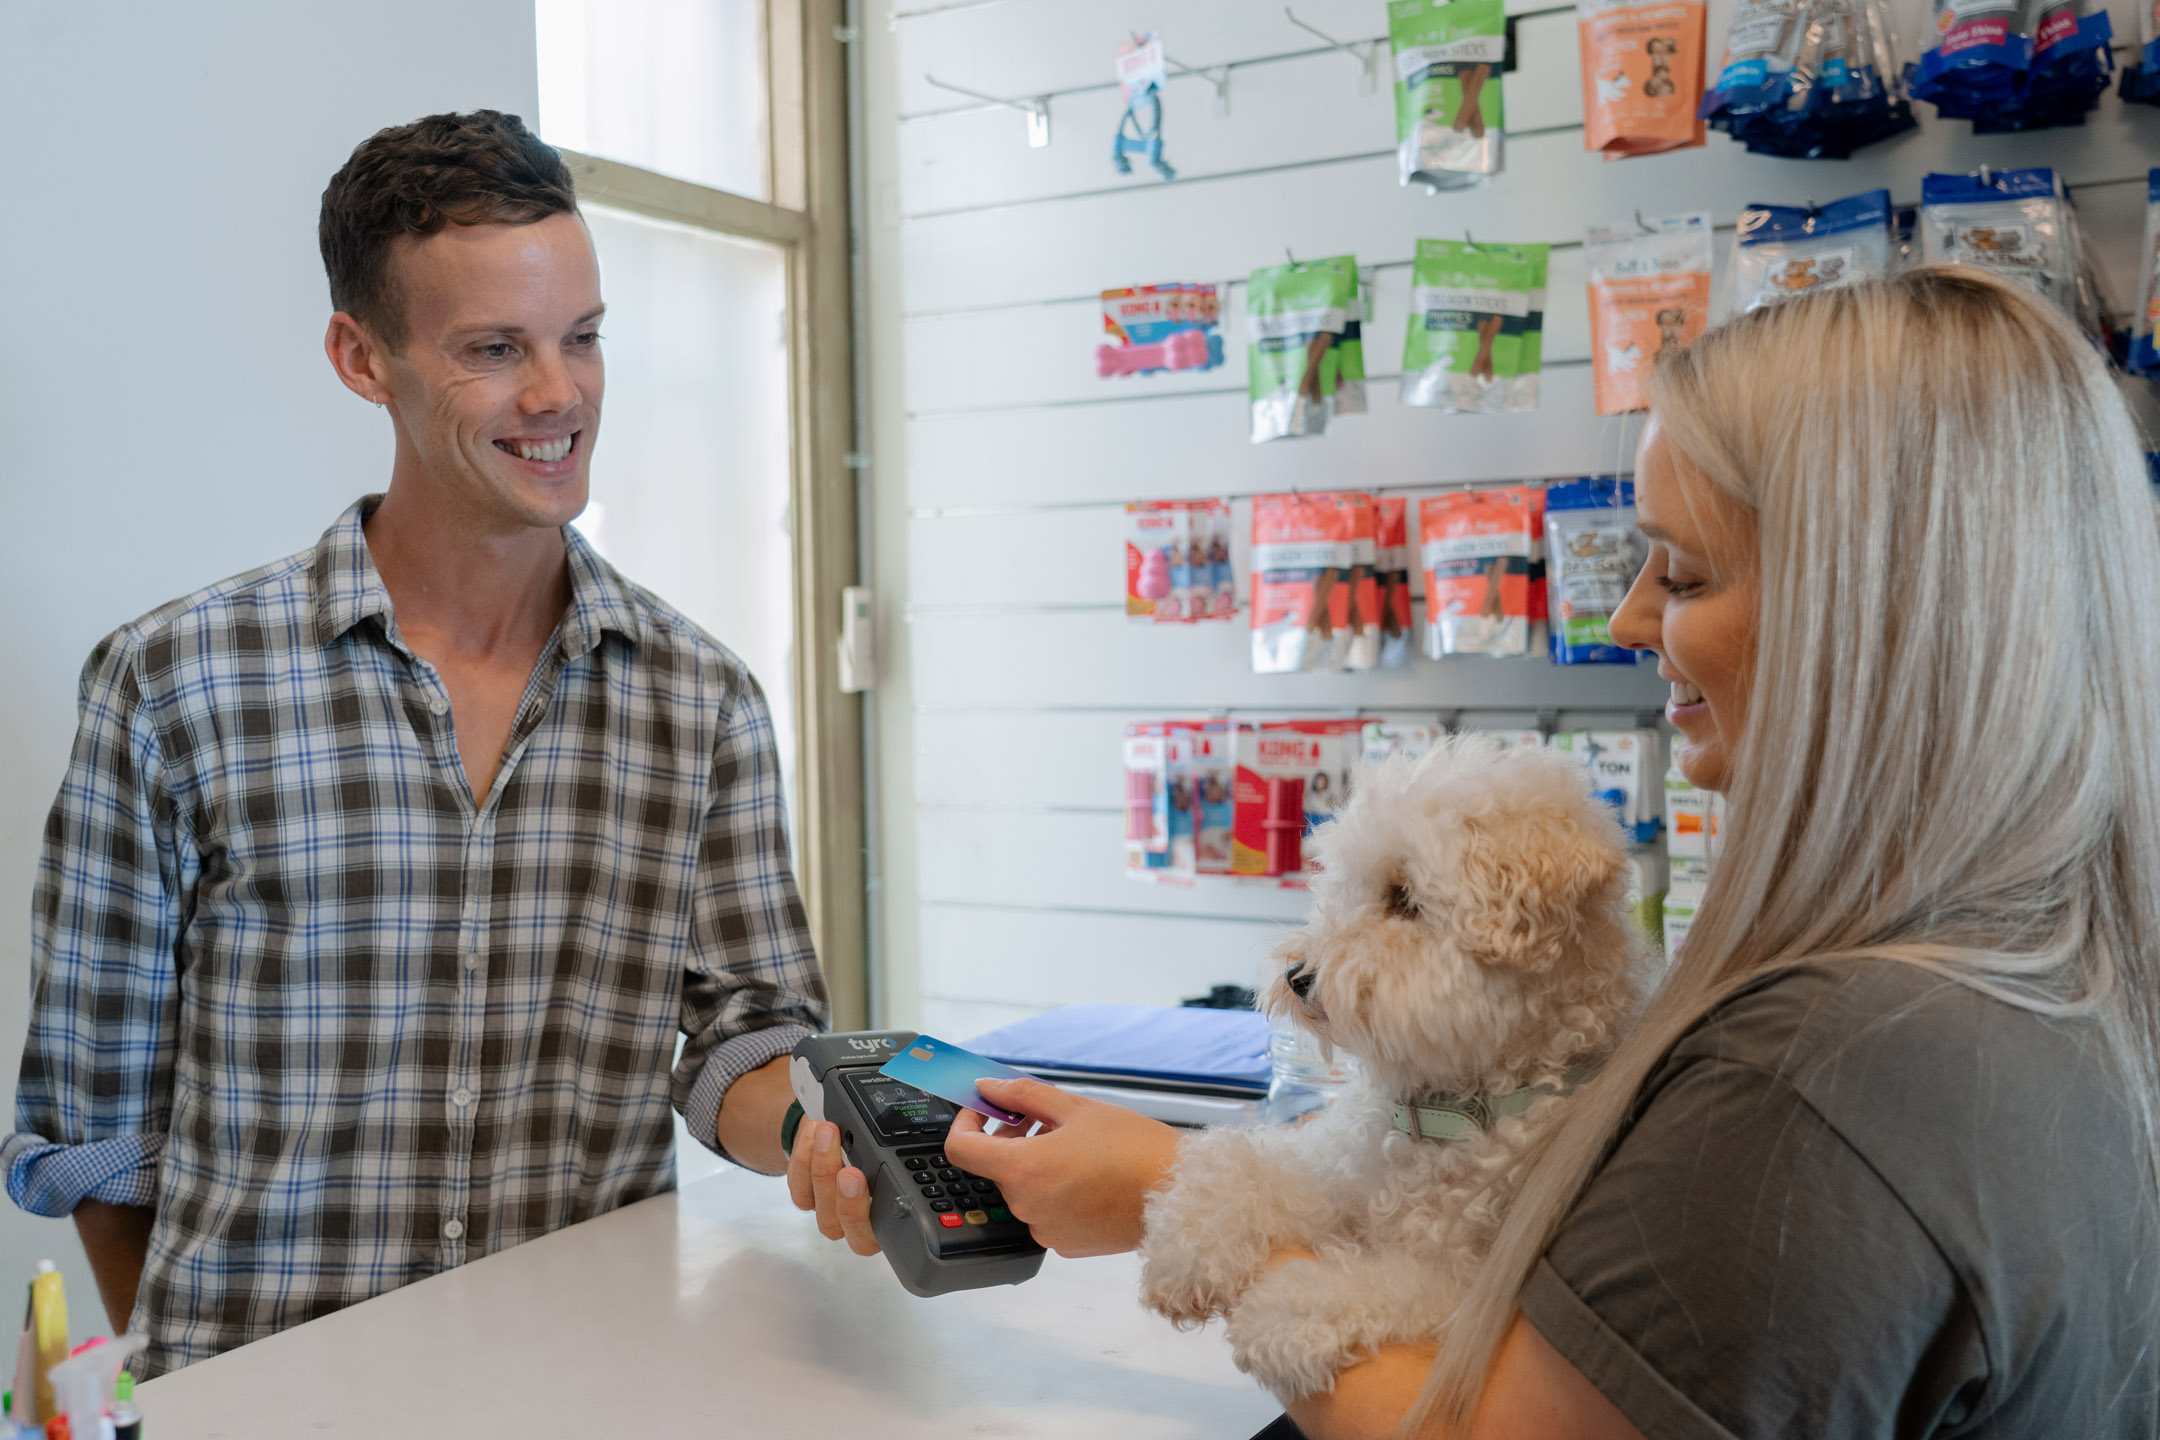 Taking-install-payments-with-Tyro-mobile-eftpos